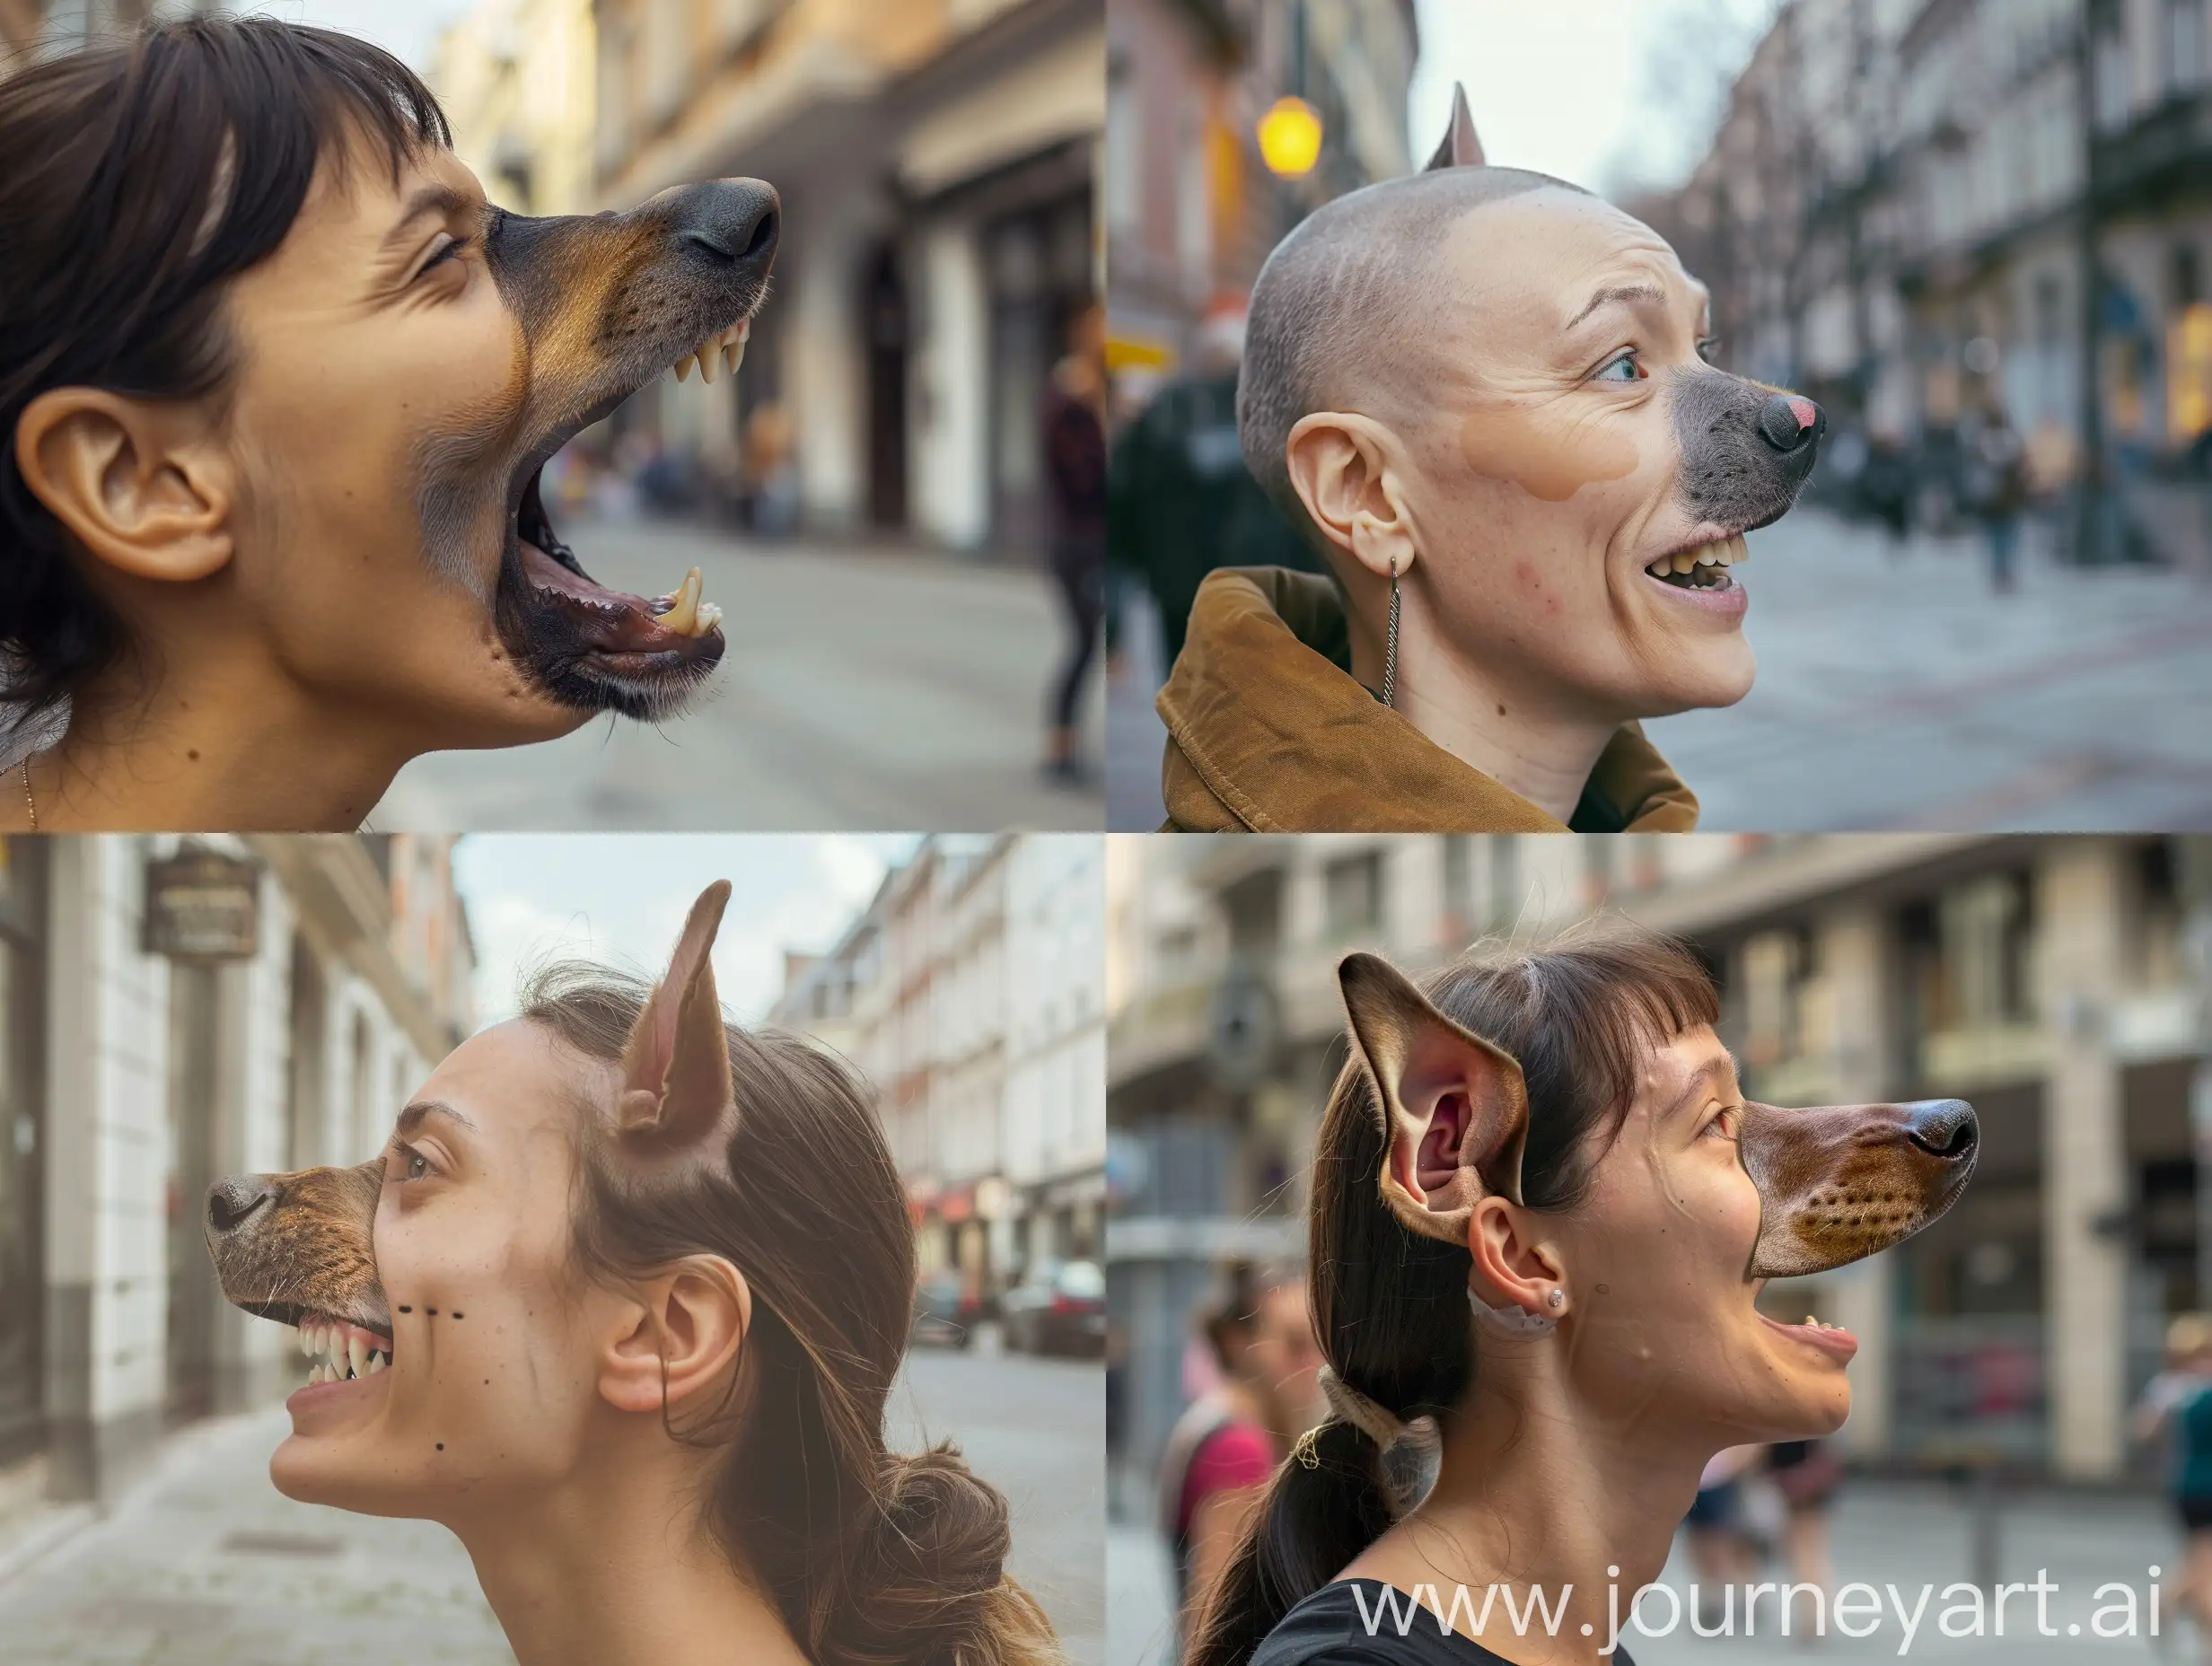 side profile photo of a european female model. her nose is transitioned dog nose and she only has human skin and sharp ear howling at the moon while standing on a street. Talking. her nasal region is stretched. Human philtrum, Human nose. Happy expression.